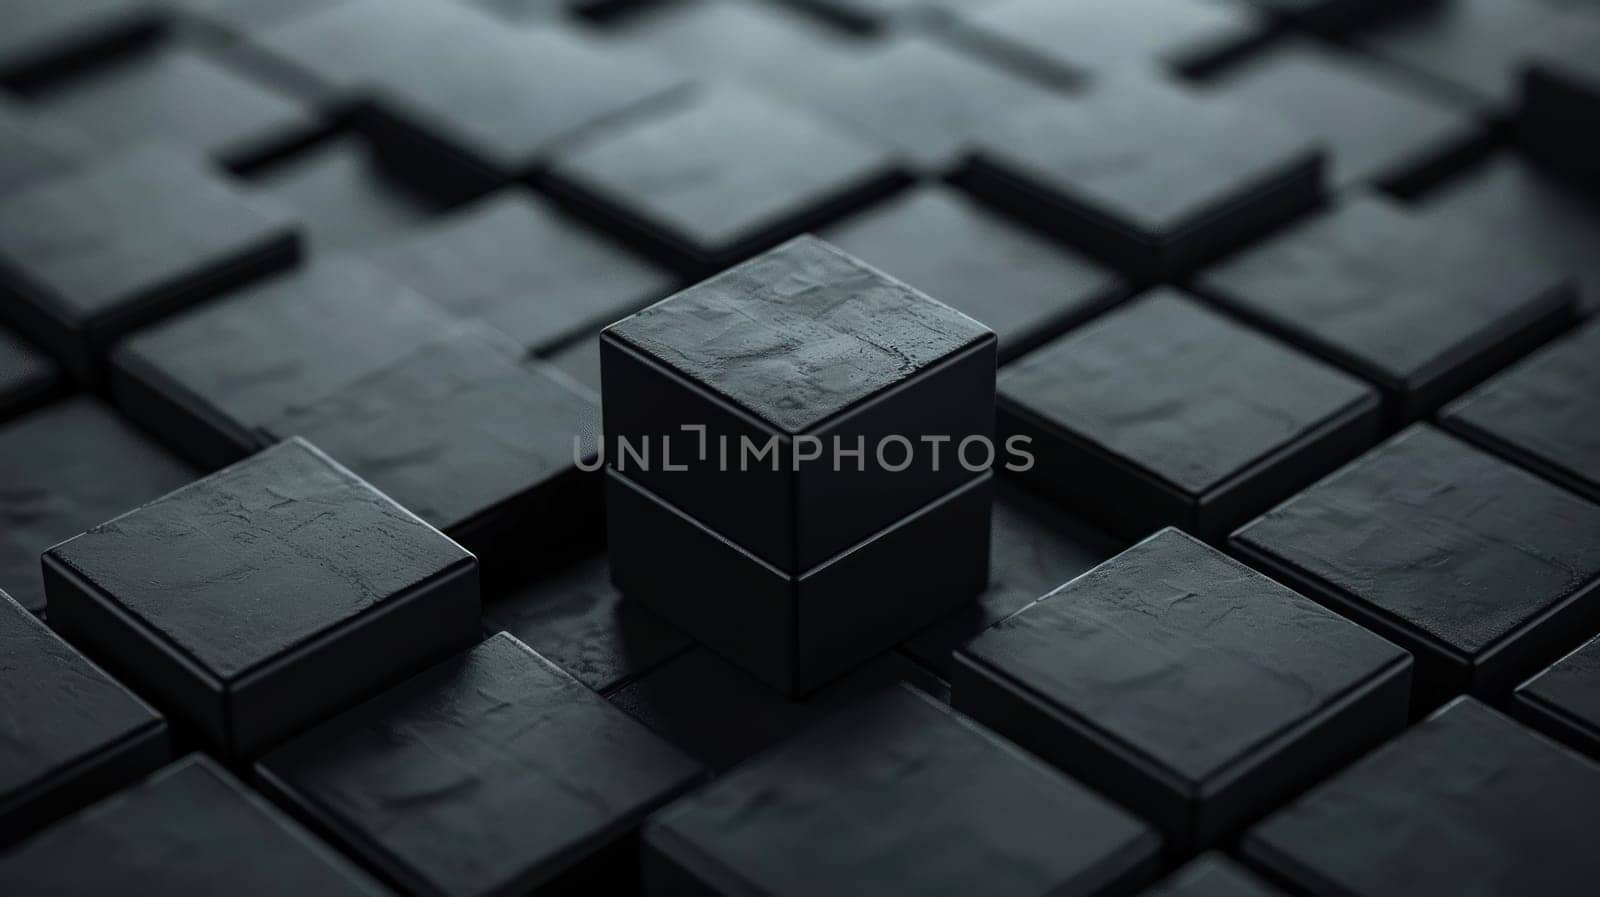 A black cube is placed on a black background by golfmerrymaker